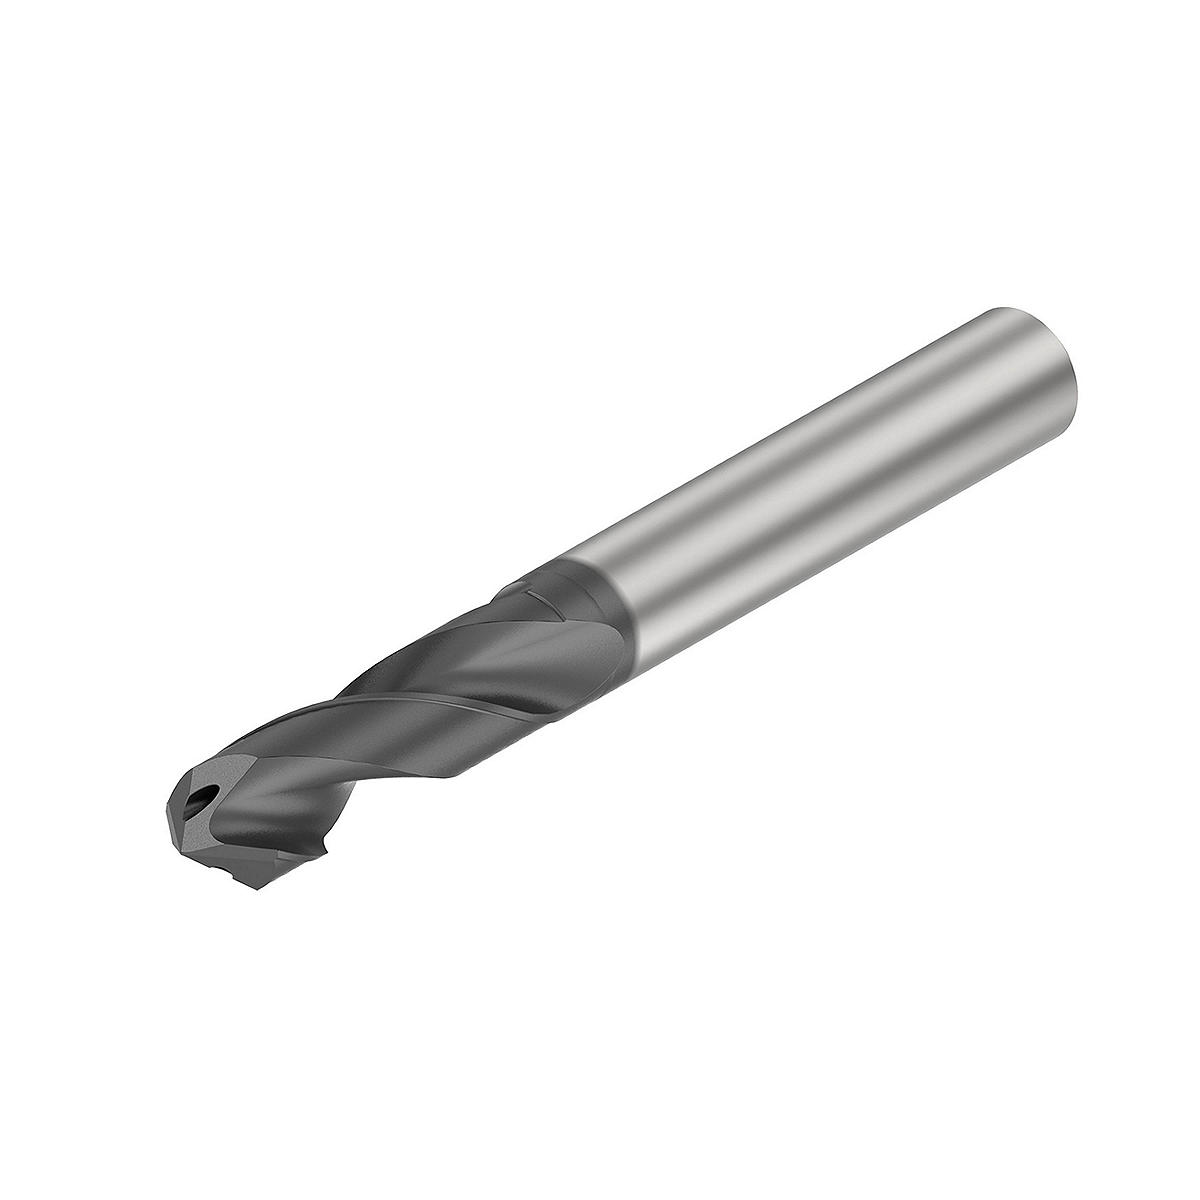 Solid Carbide Drill for CFRP Rivot Hole Machining in Aerospace